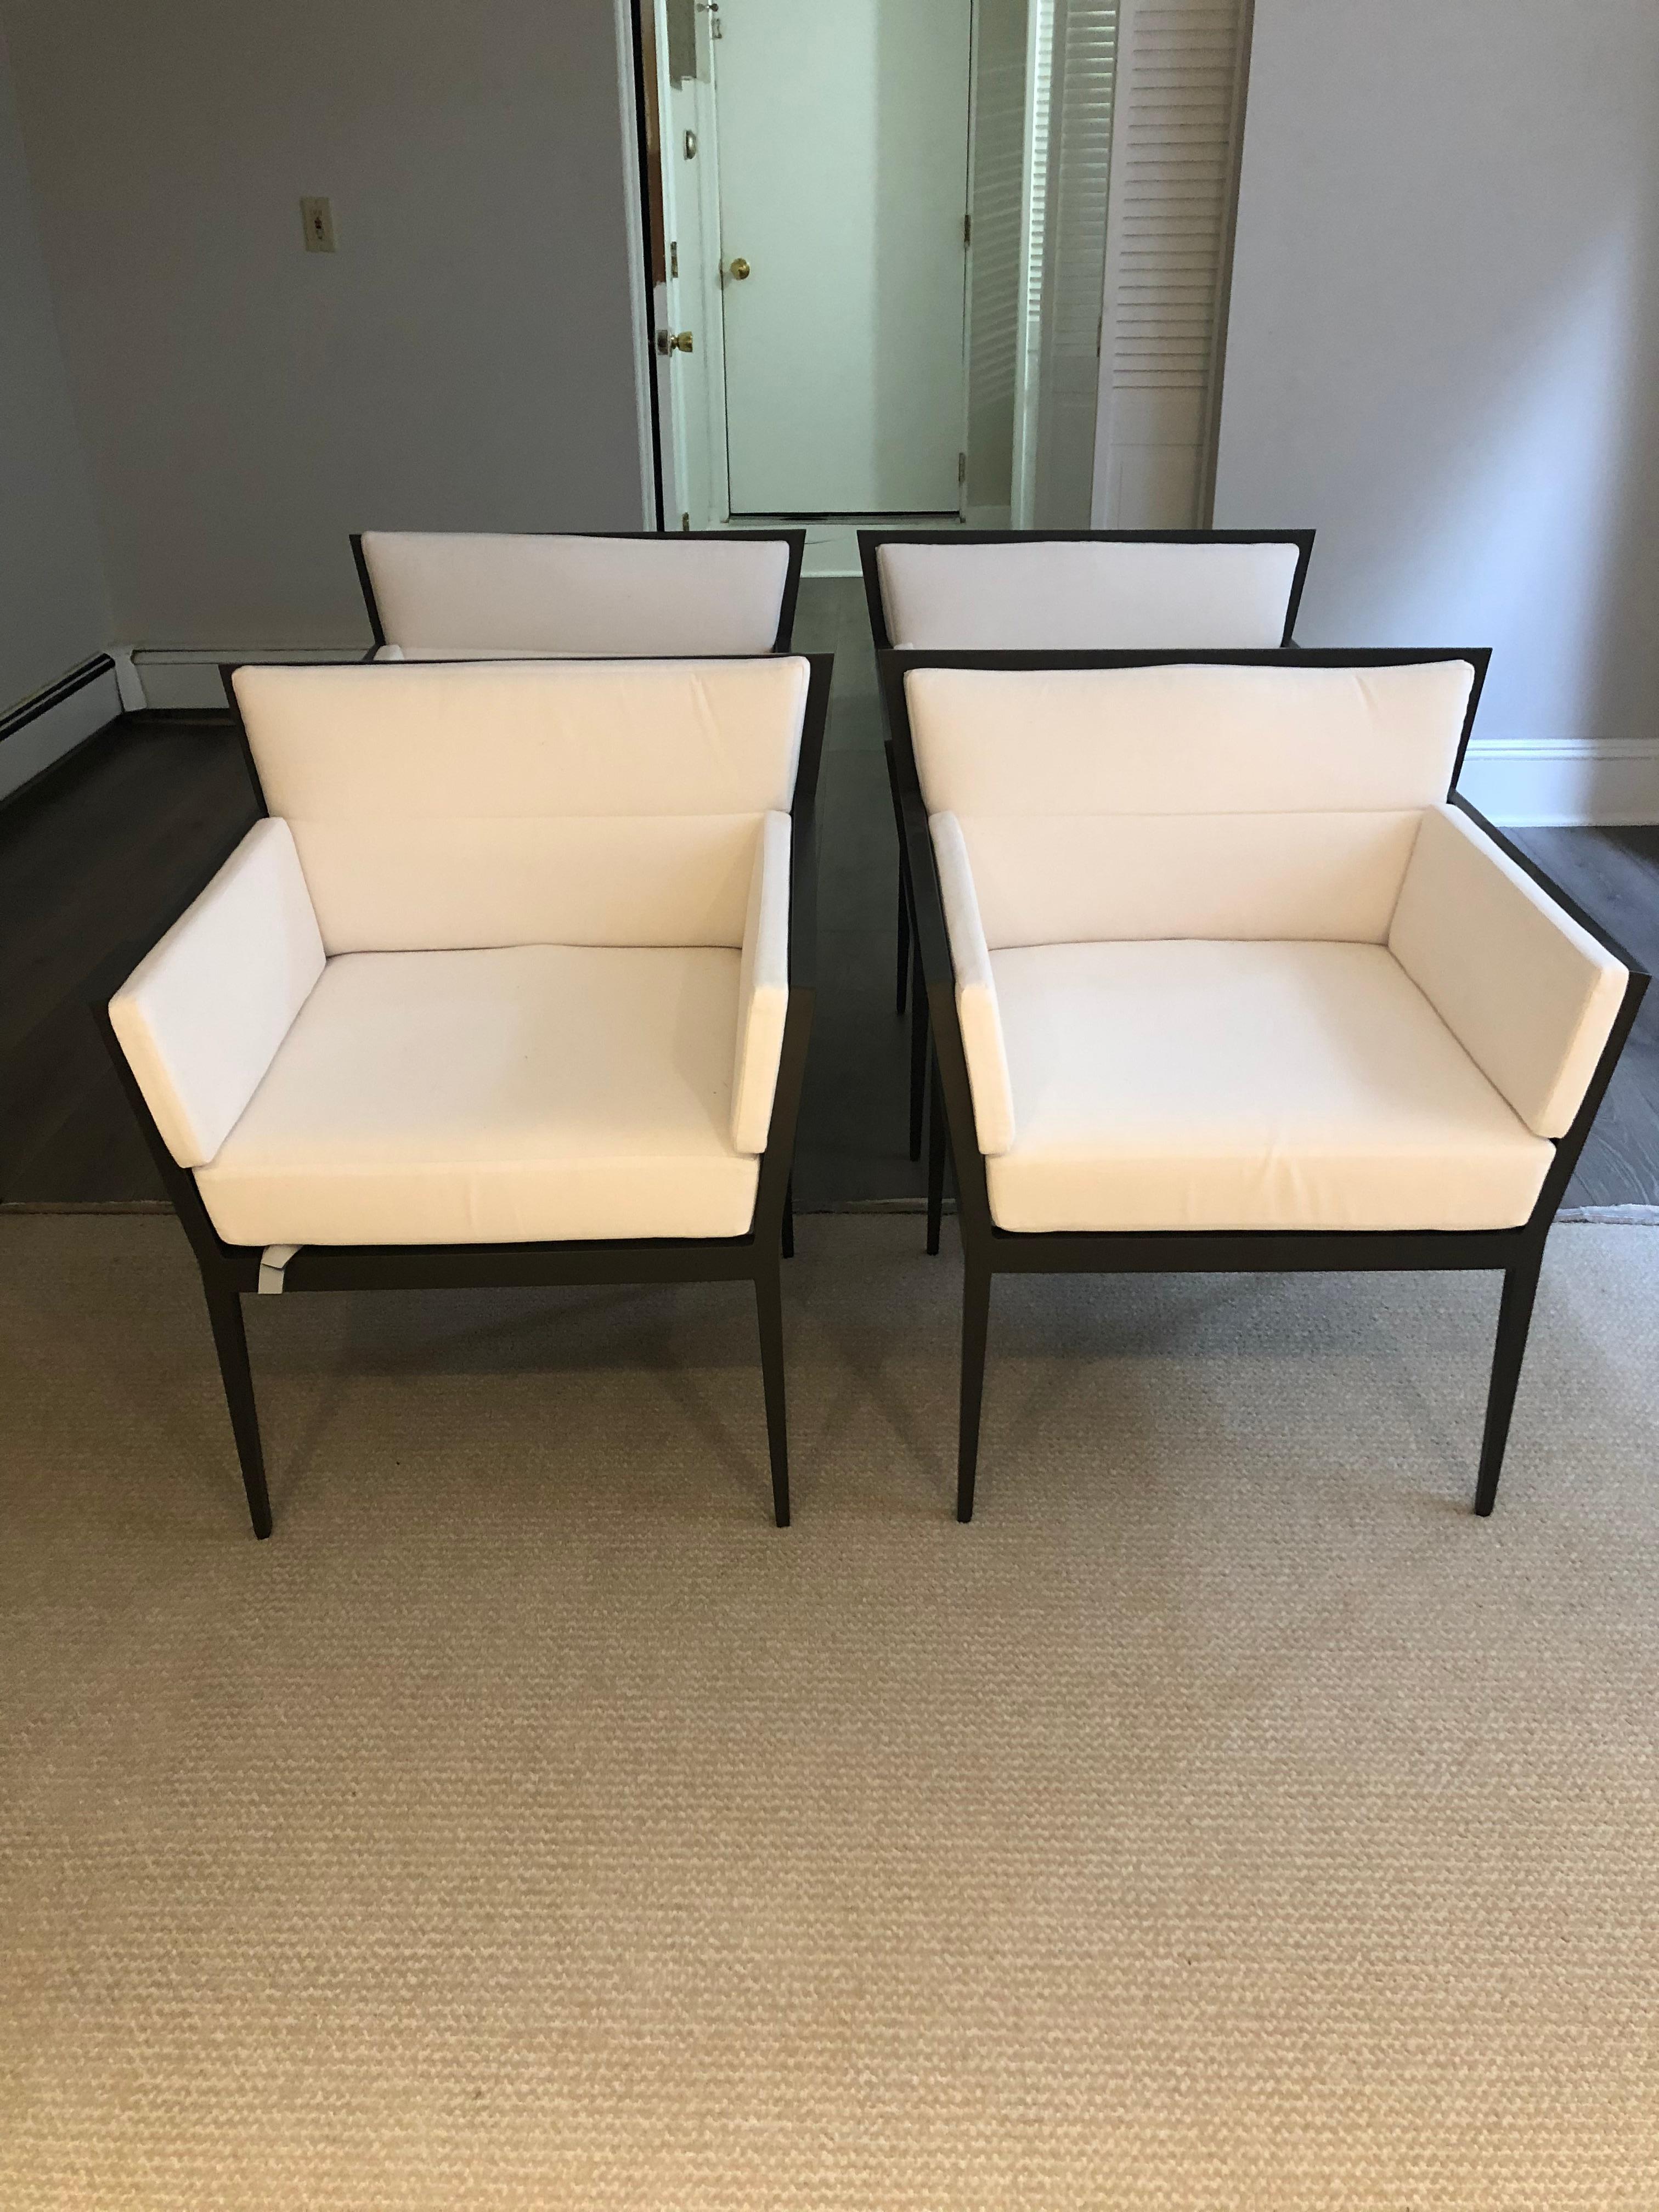 Incredibly chic set of 4 dark grey aluminum outdoor club or dining chairs with a movie star vibe having crisp Sunbrella white interior cushions. Designed by Janus et Cie, these are meant more for the patio because of their light weight and durable